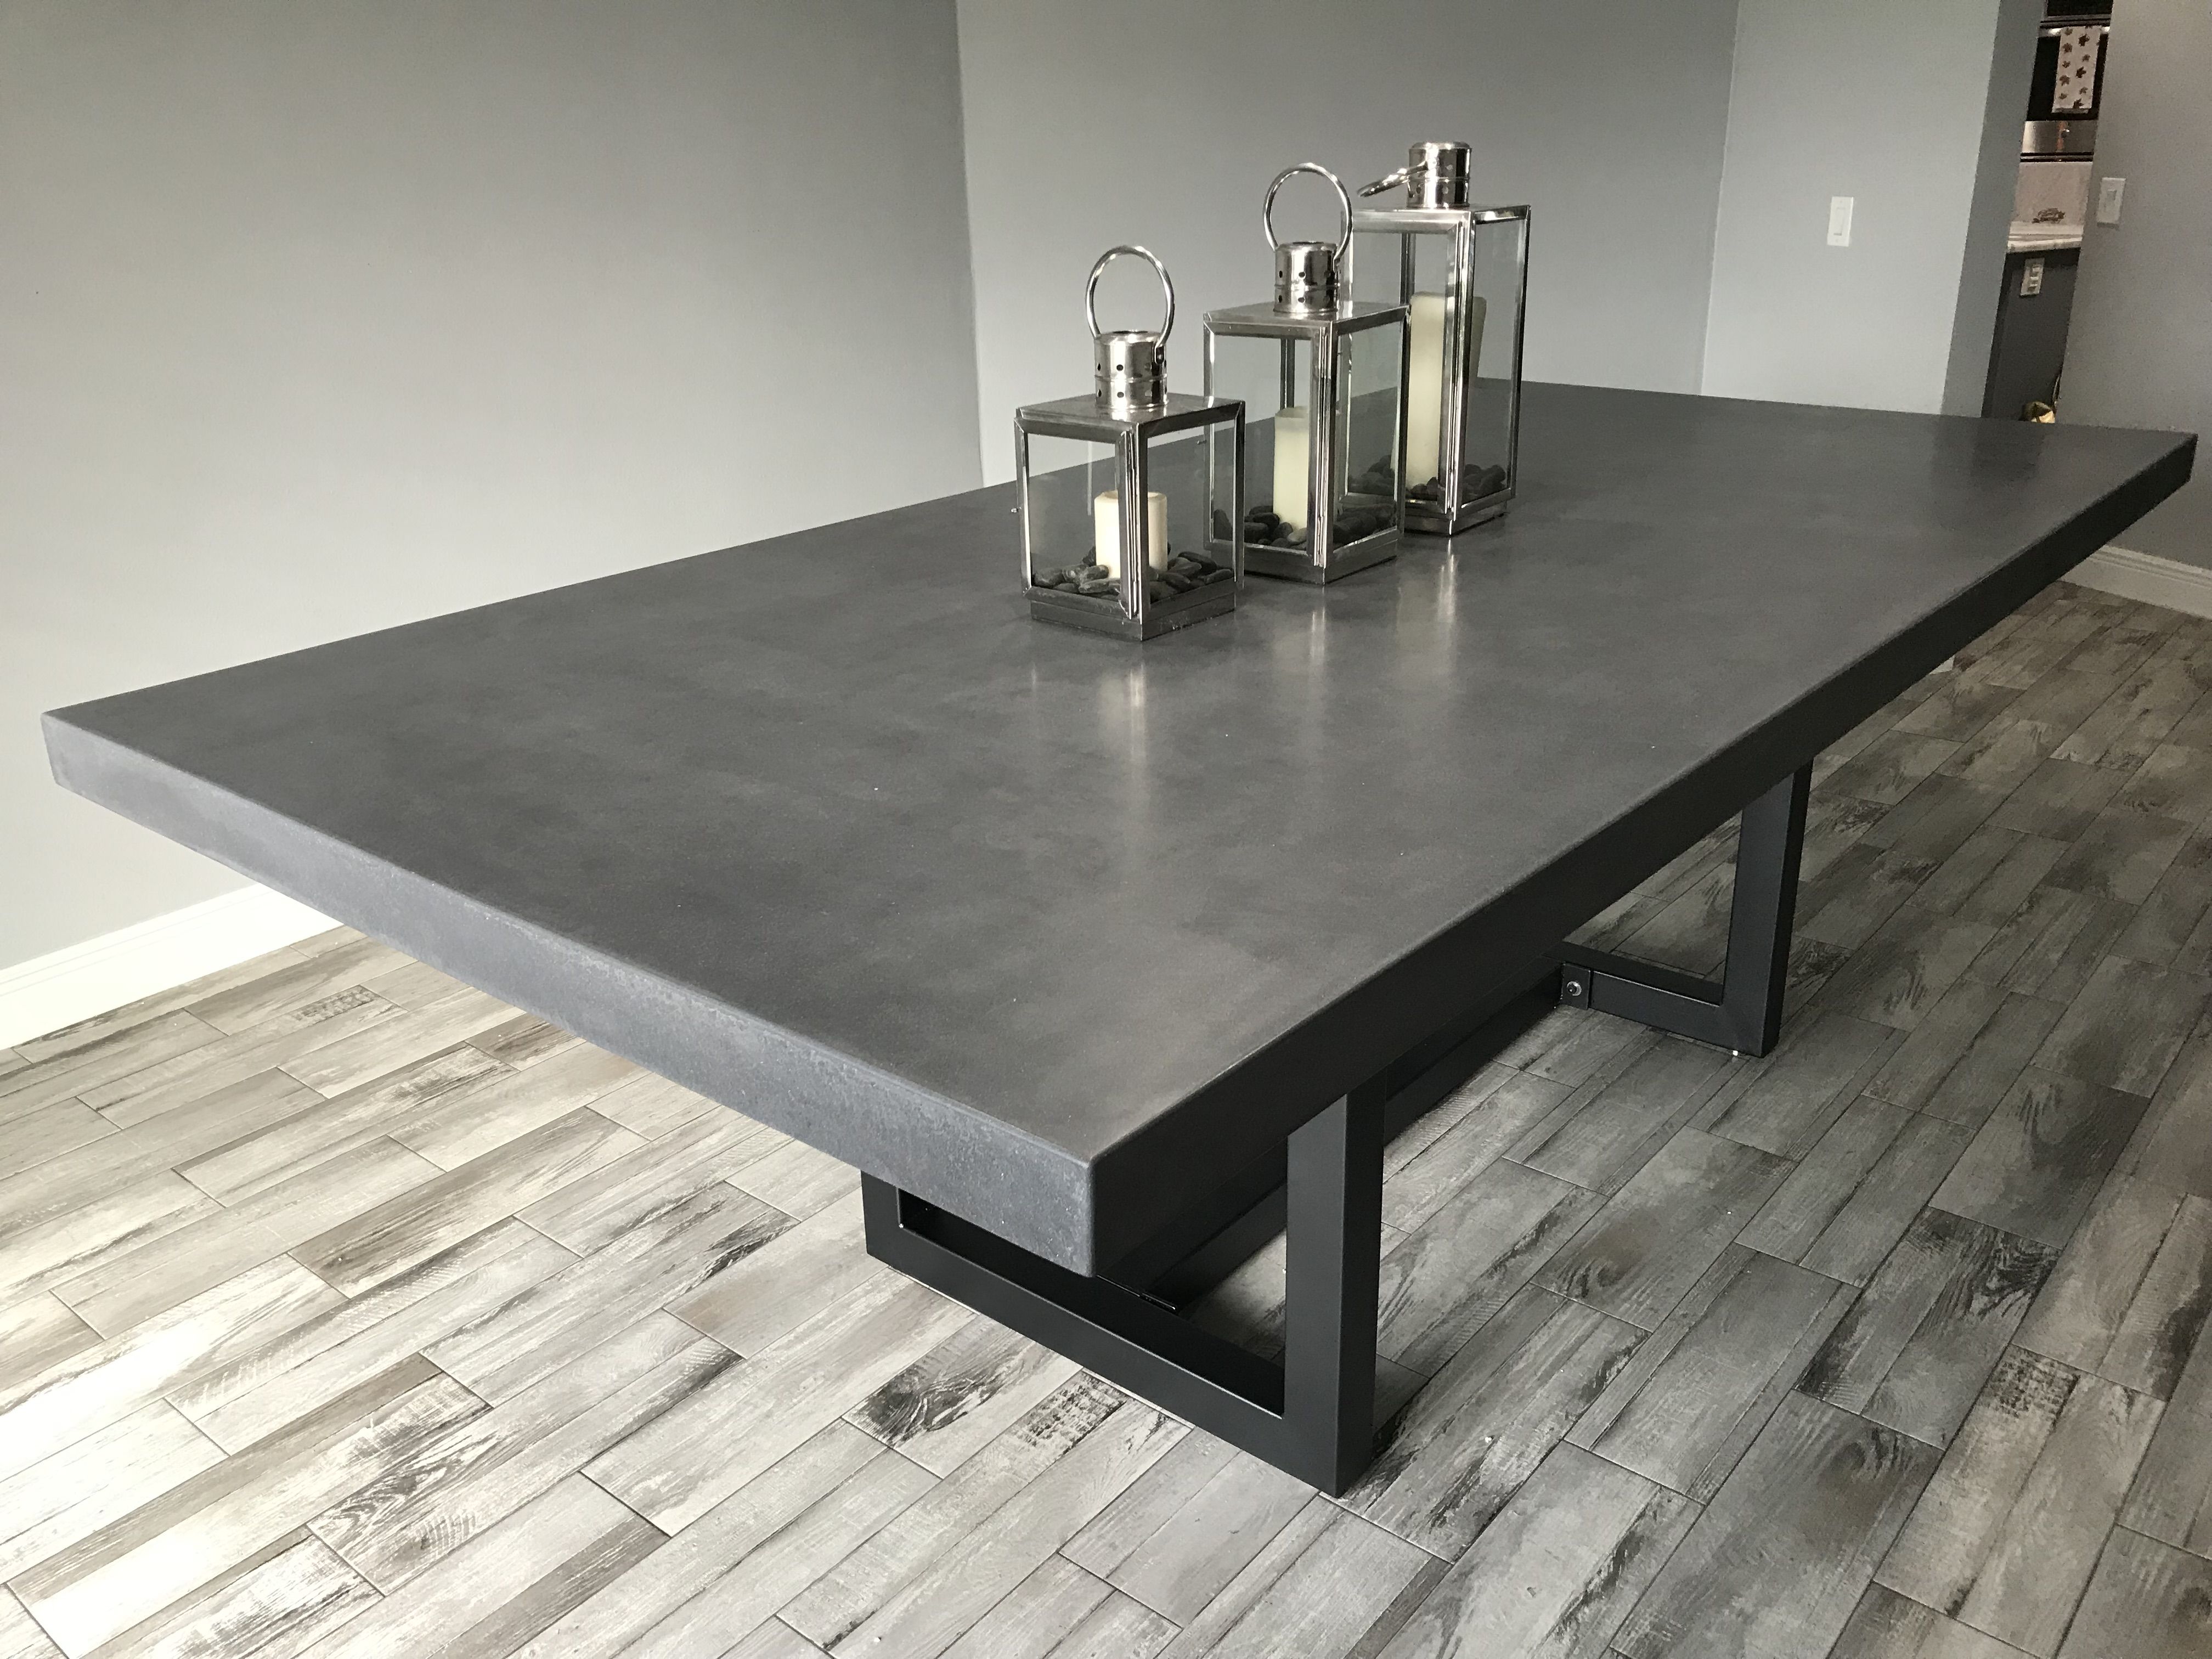 Custom Dining Table, 10 Person 9ft X 4.5ft X 3 Inches Thick, Concrete